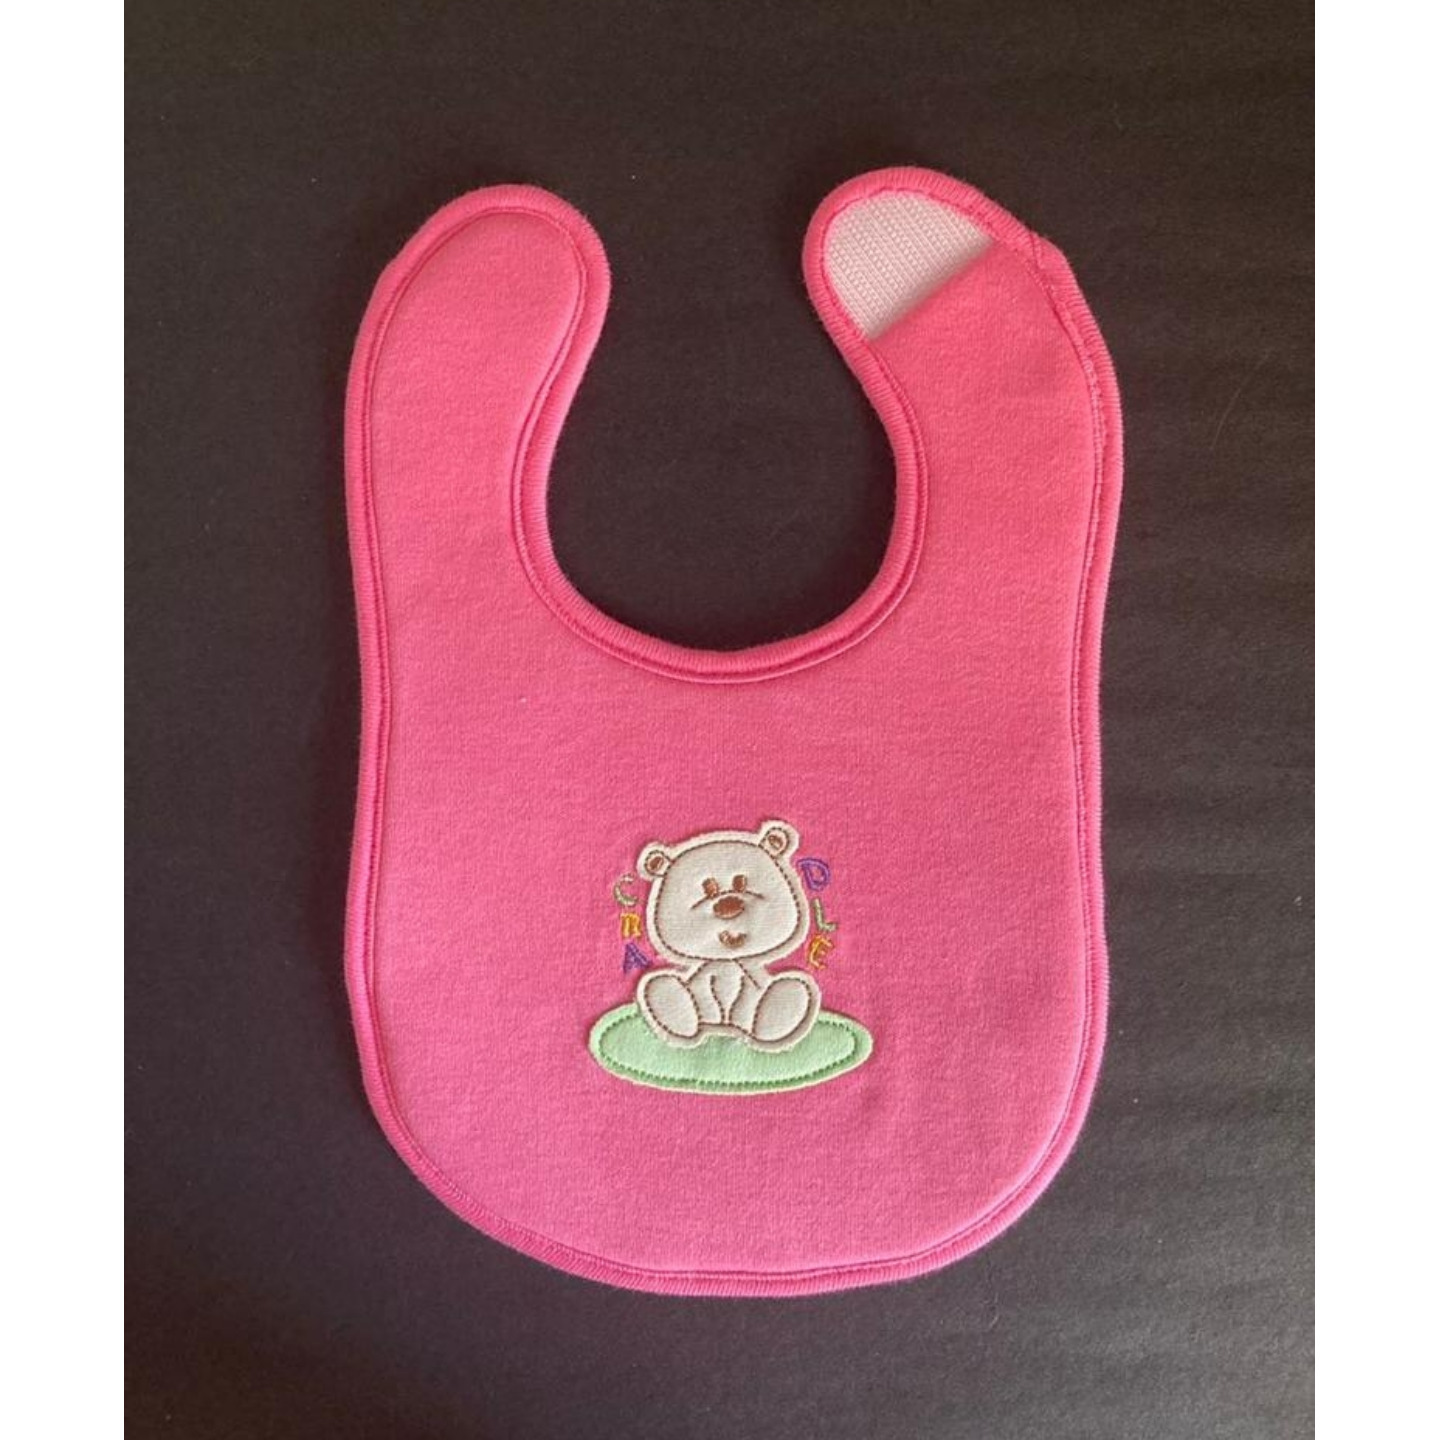 Cradle Togs Newborn Baby Bibs Rs 160 Only